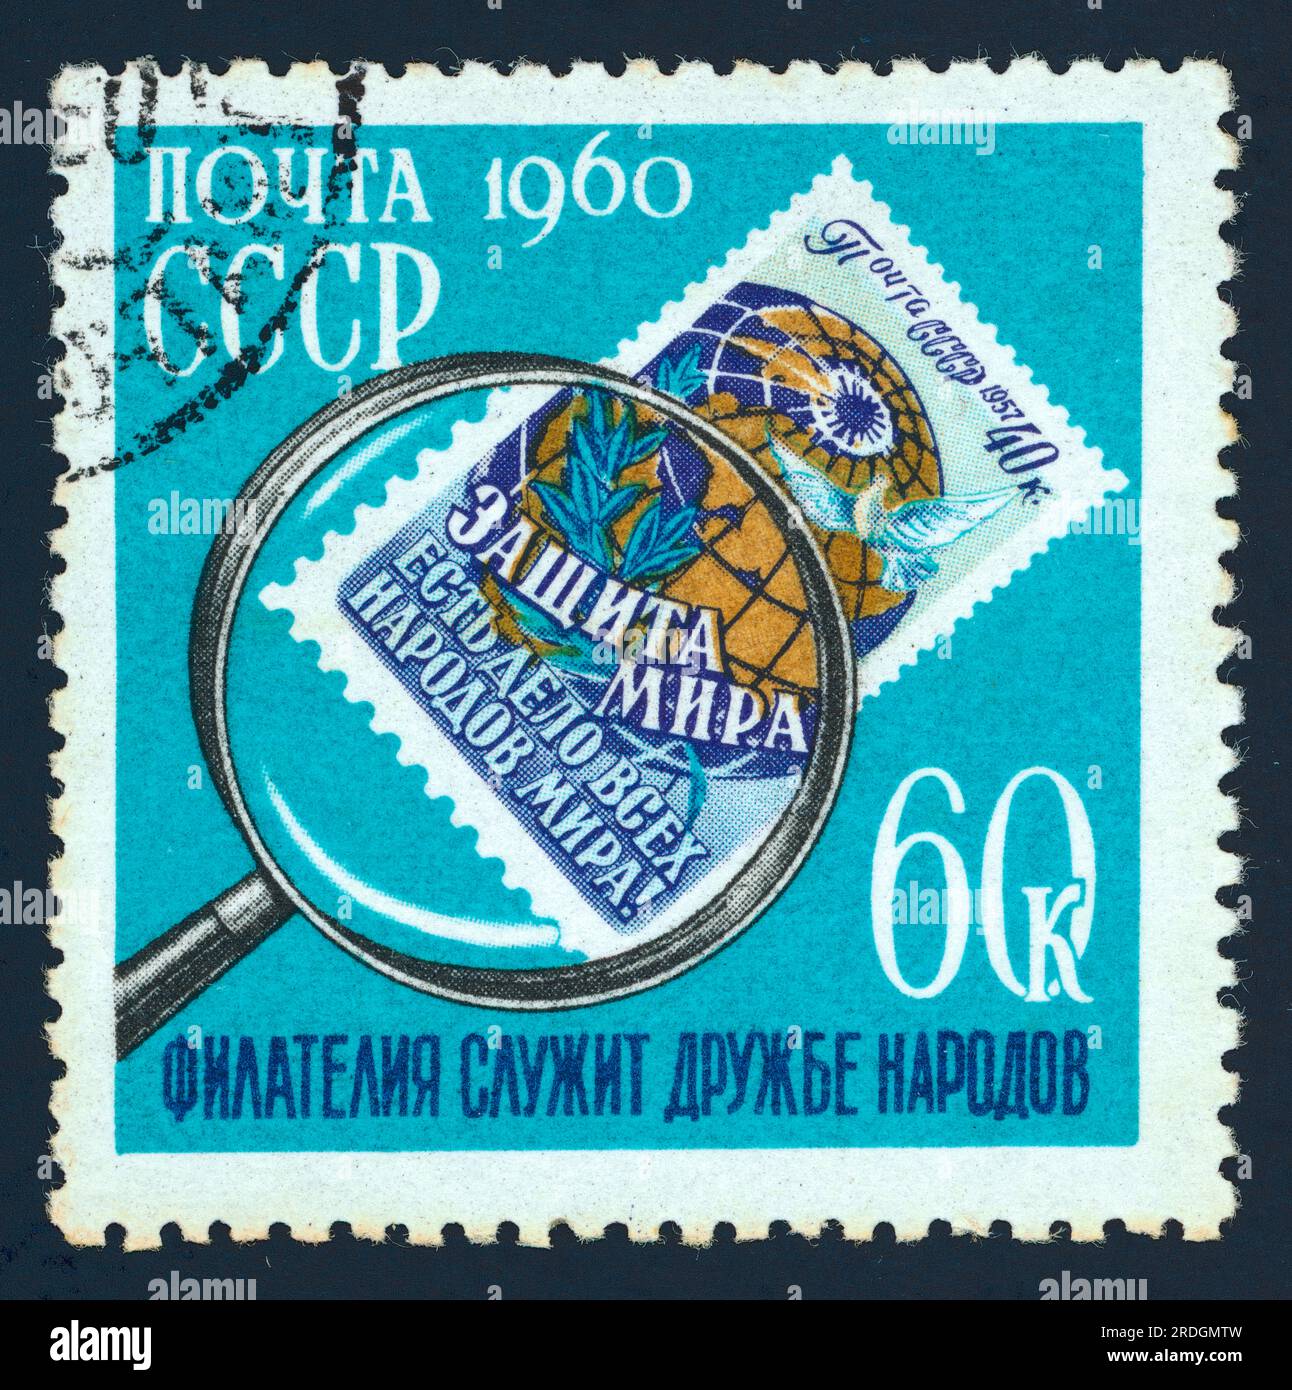 A postage stamp issued in the USSR in 1960 for the International Collectors' Day. The turquoise stamp features a postage stamp under a magnifying glass. The smaller stamp within a stamp features the text: 'защита мира есть дело всех народов мира' 'Defending peace in the world is all nations' work'. The text 'Филателия служит дружбе народов' – 'Philately serves the friendship of peoples' is printed below. Face value: 60K (60 kopeks). Stock Photo